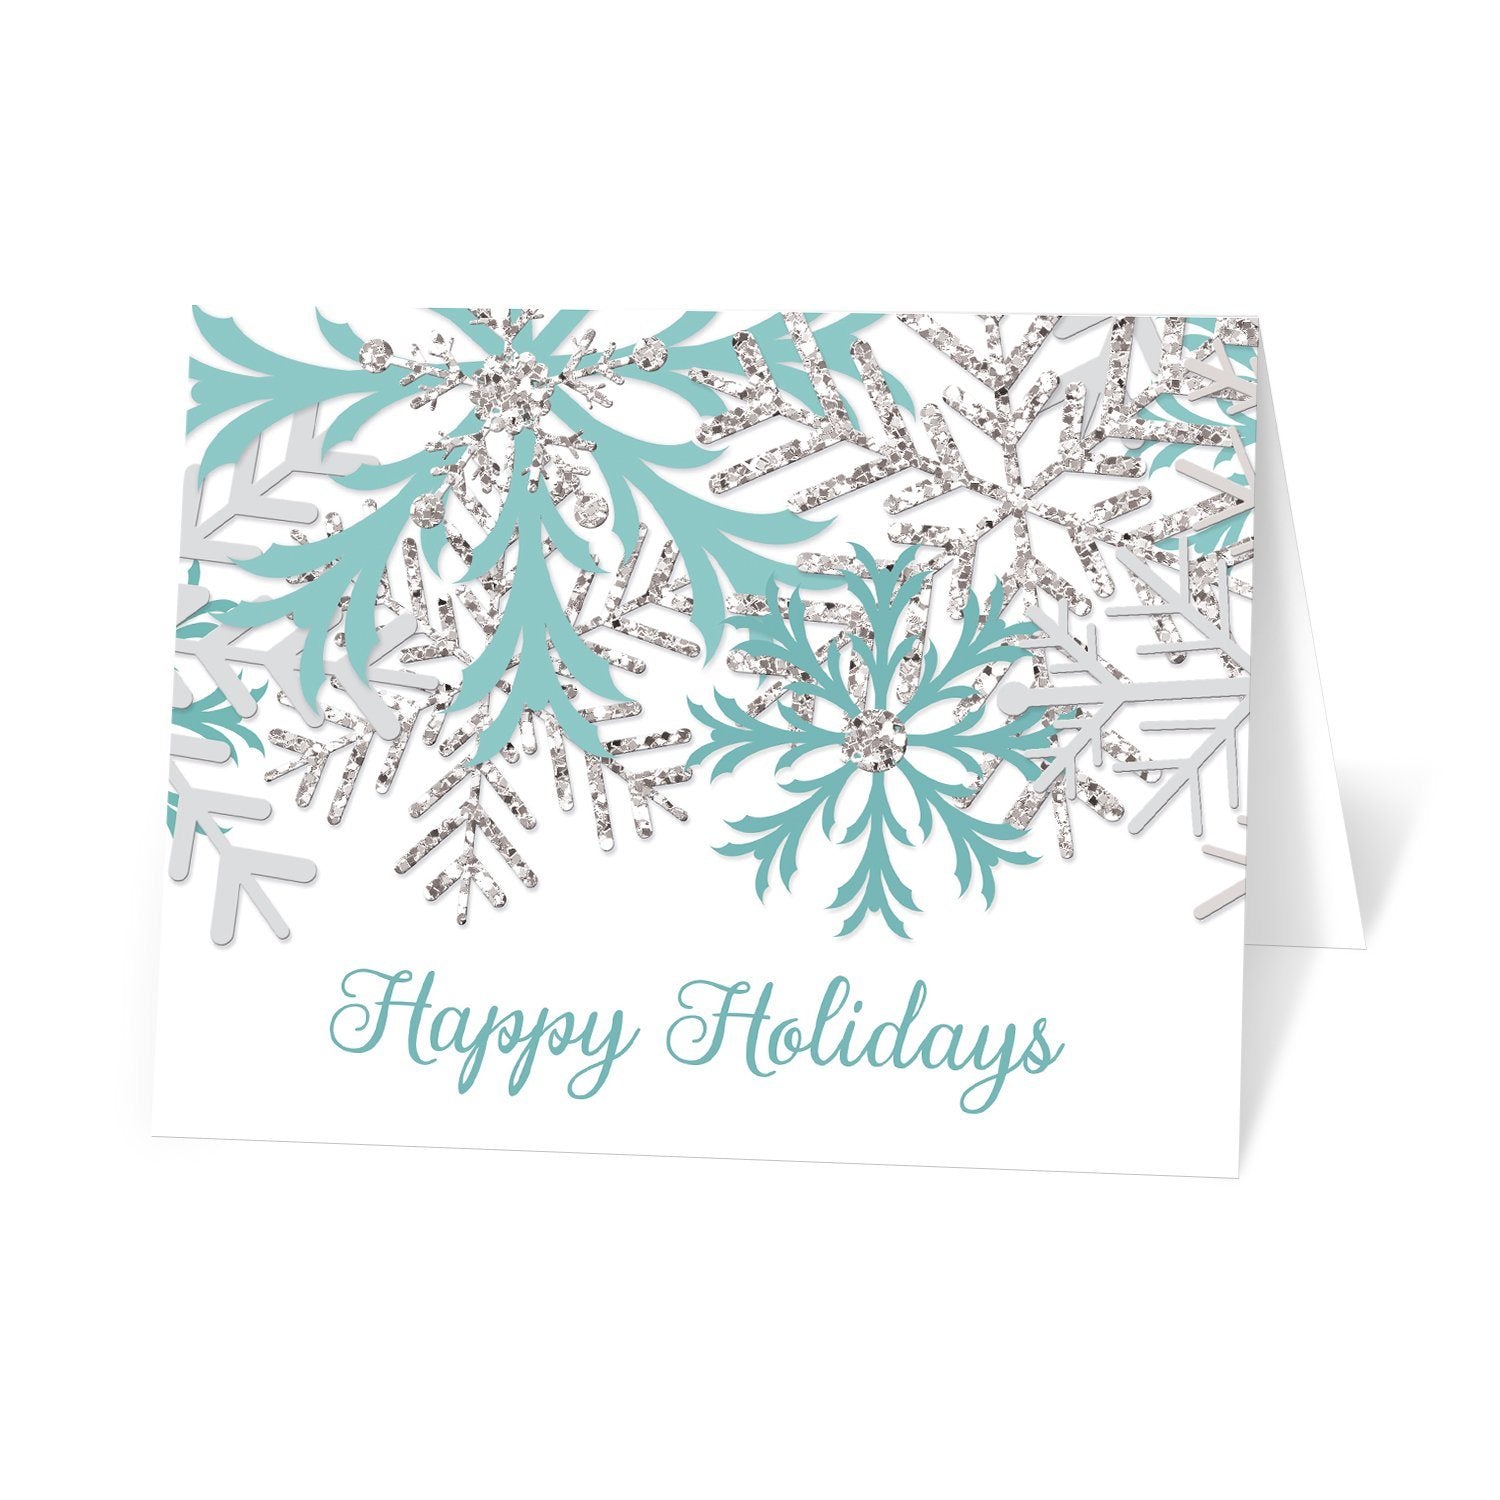 Winter Teal Silver Snowflake Holiday Cards at Artistically Invited. Modern winter teal holiday cards designed with teal, light gray, and silver glitter-illustrated snowflakes over a white background. 'Happy Holidays' is printed in a whimsical teal script font over the white below the snowflakes. 